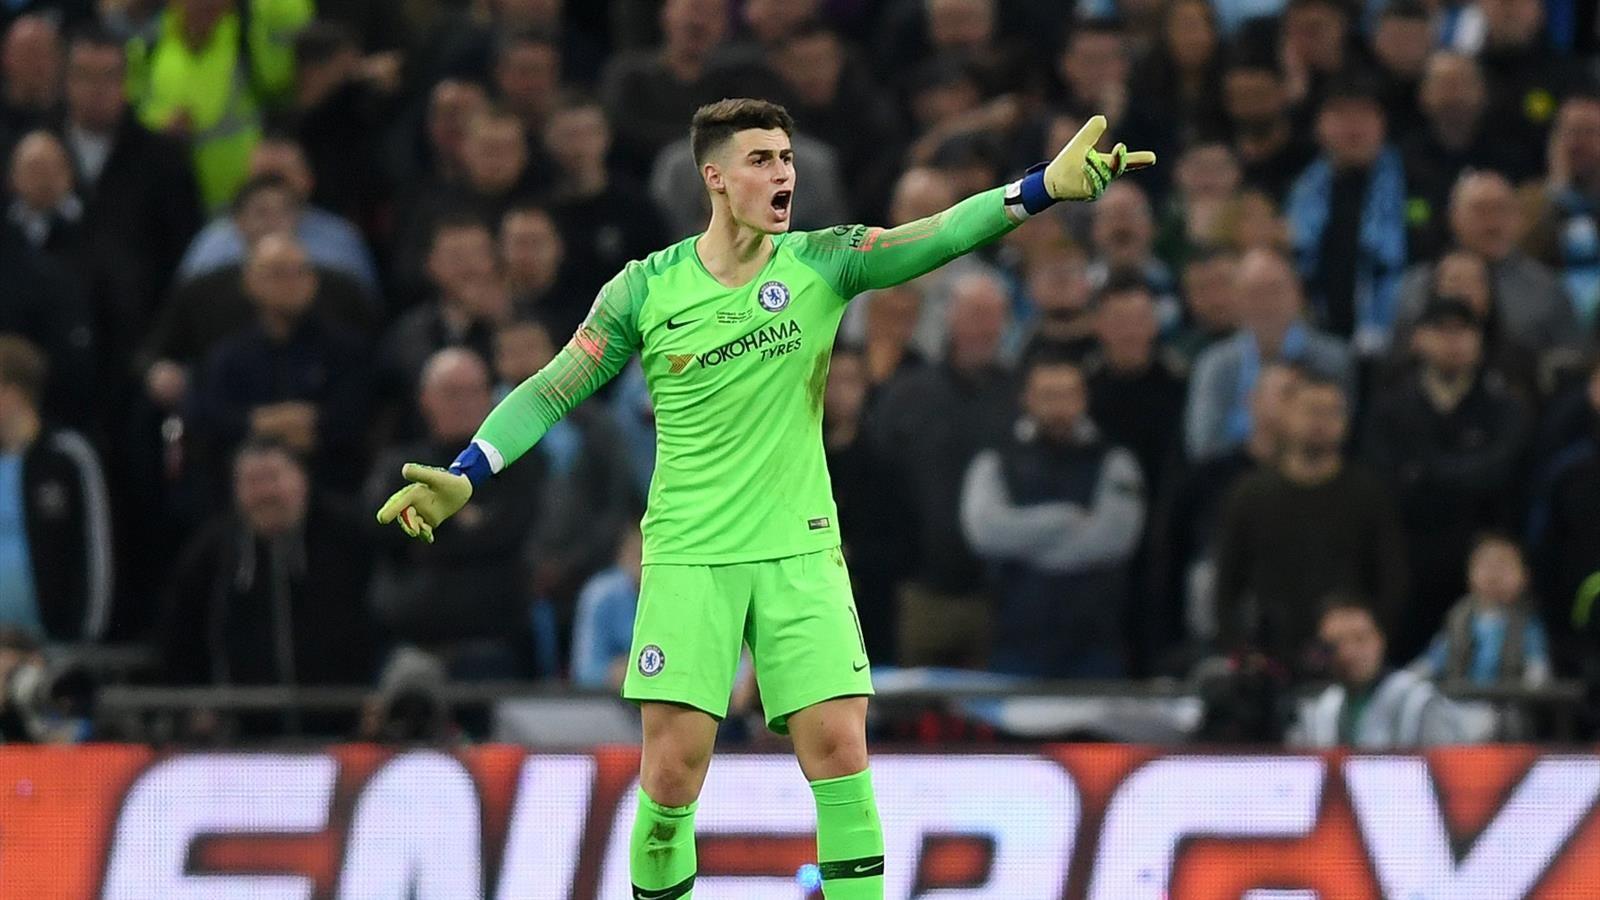 Kepa Arrizabalaga: In no moment was it my intention to disobey but